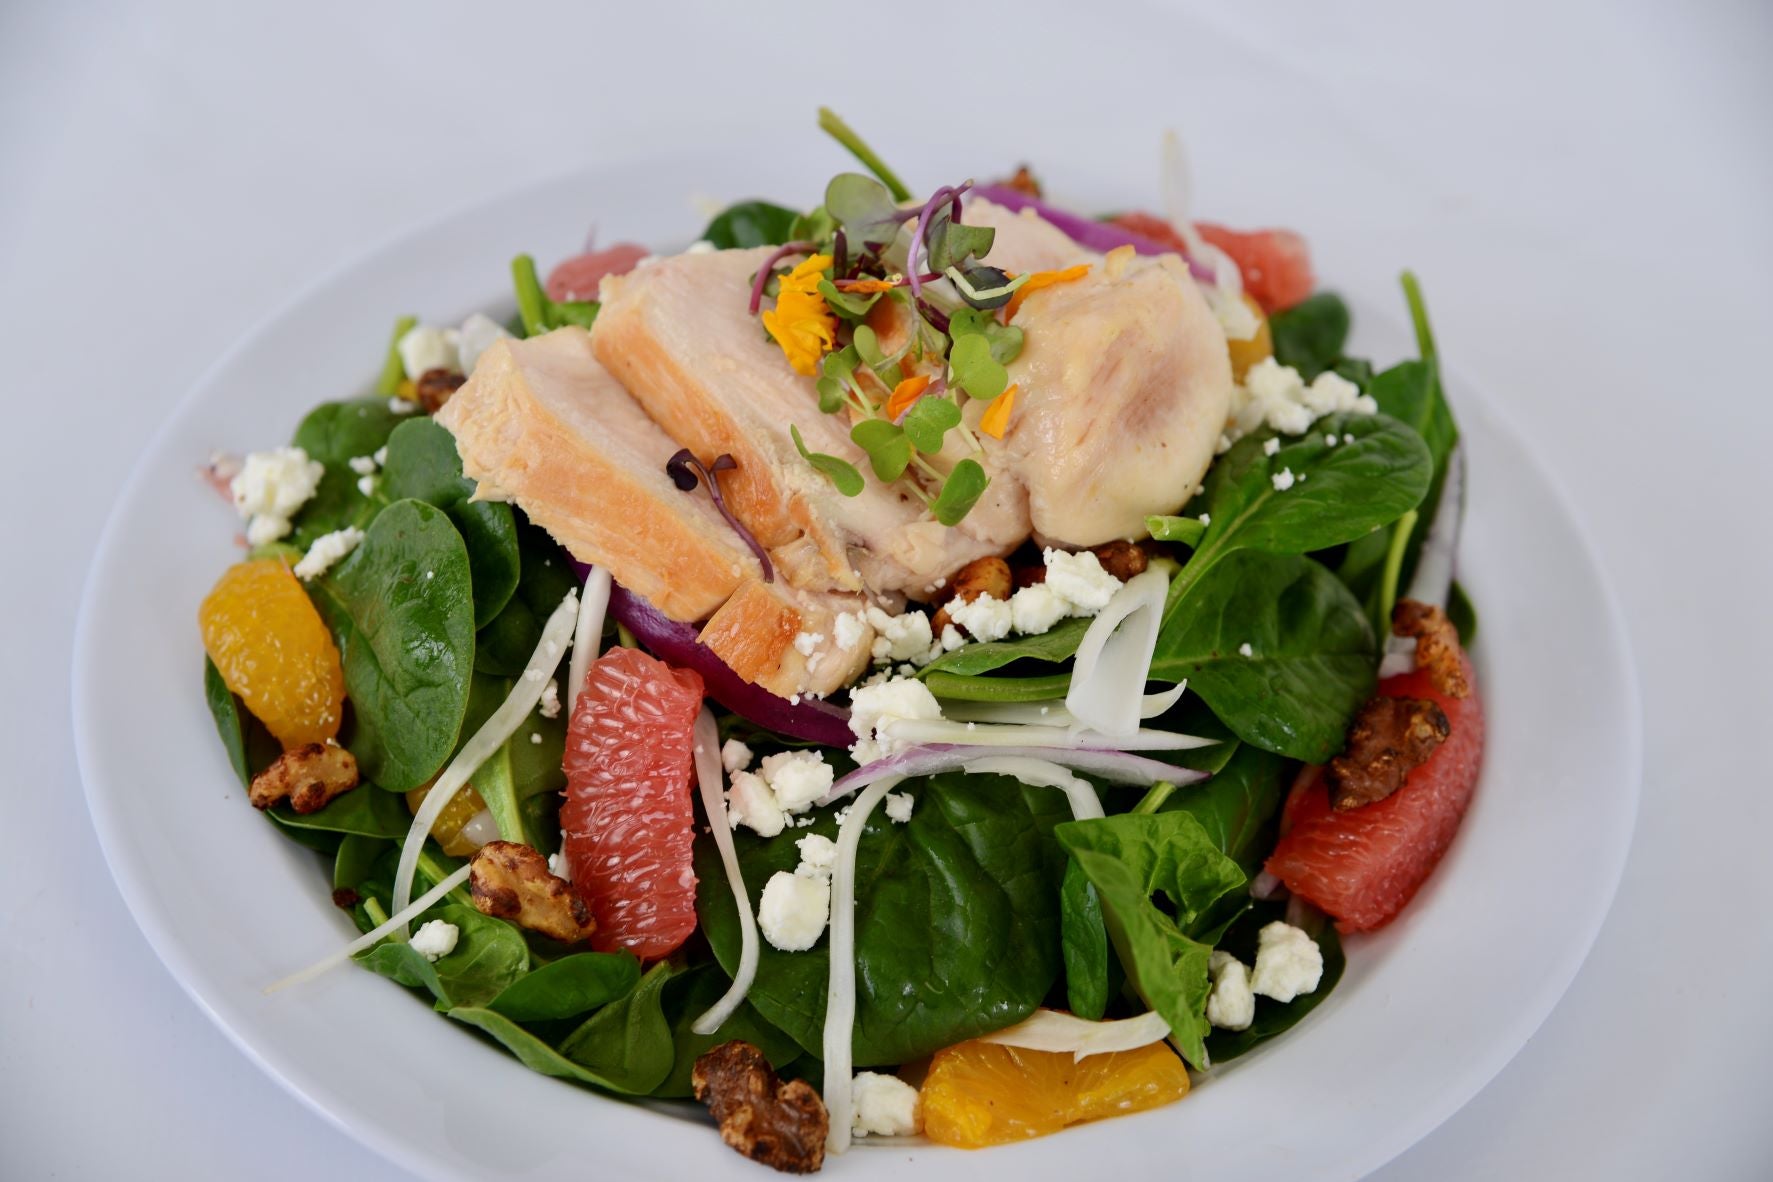 Rocket Pear Salad w/ Chicken Breast or Salmon (Monday 10/9 Delivery)